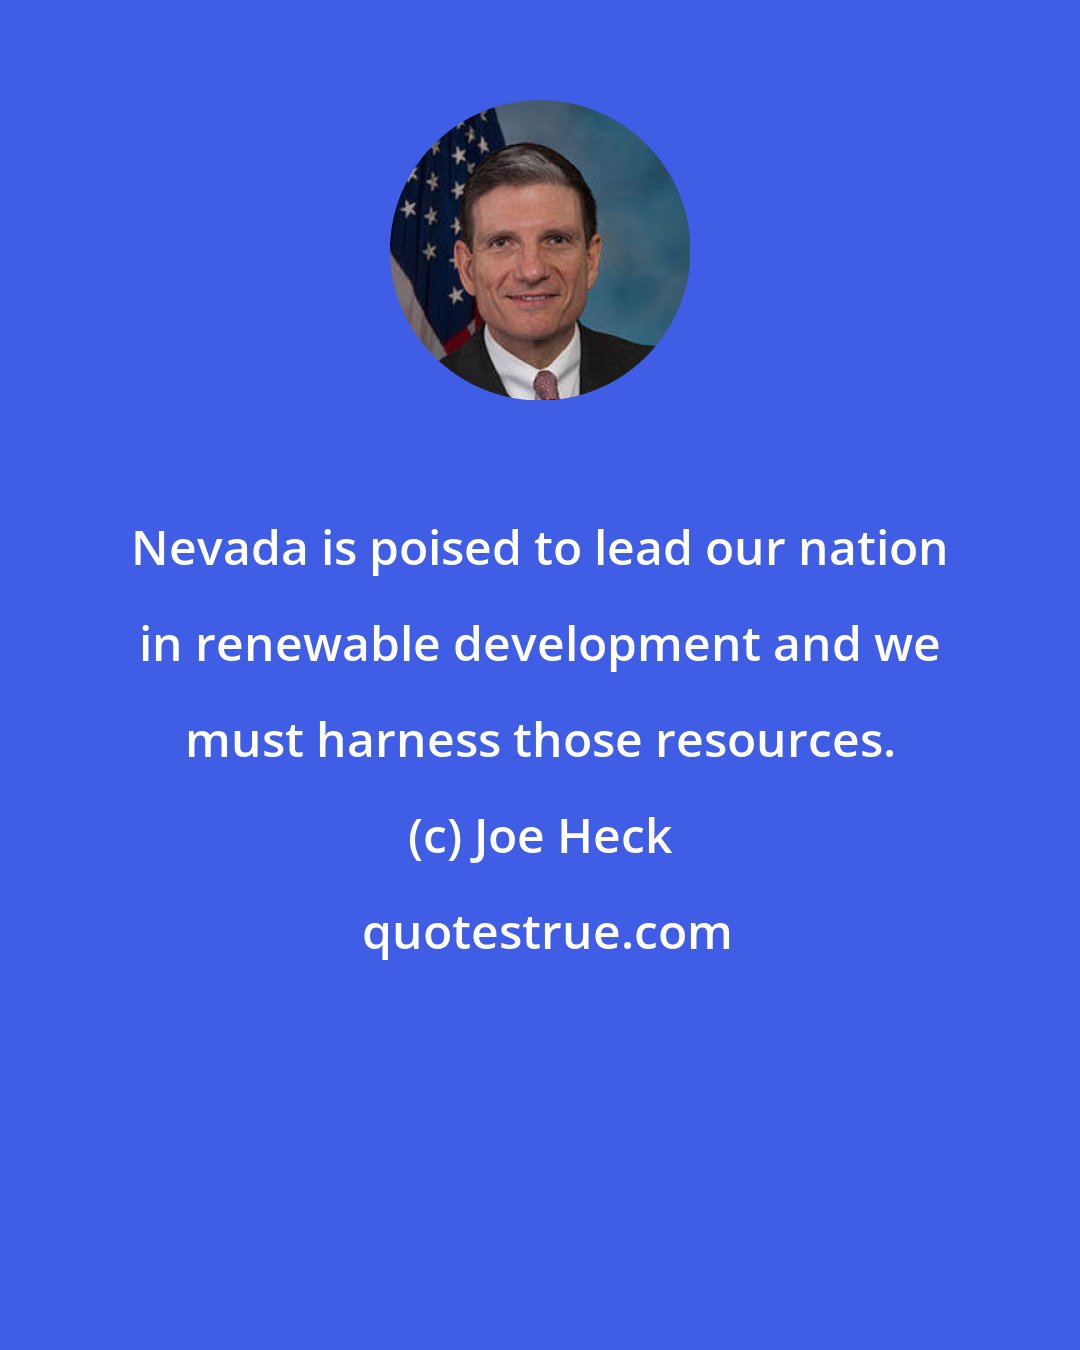 Joe Heck: Nevada is poised to lead our nation in renewable development and we must harness those resources.